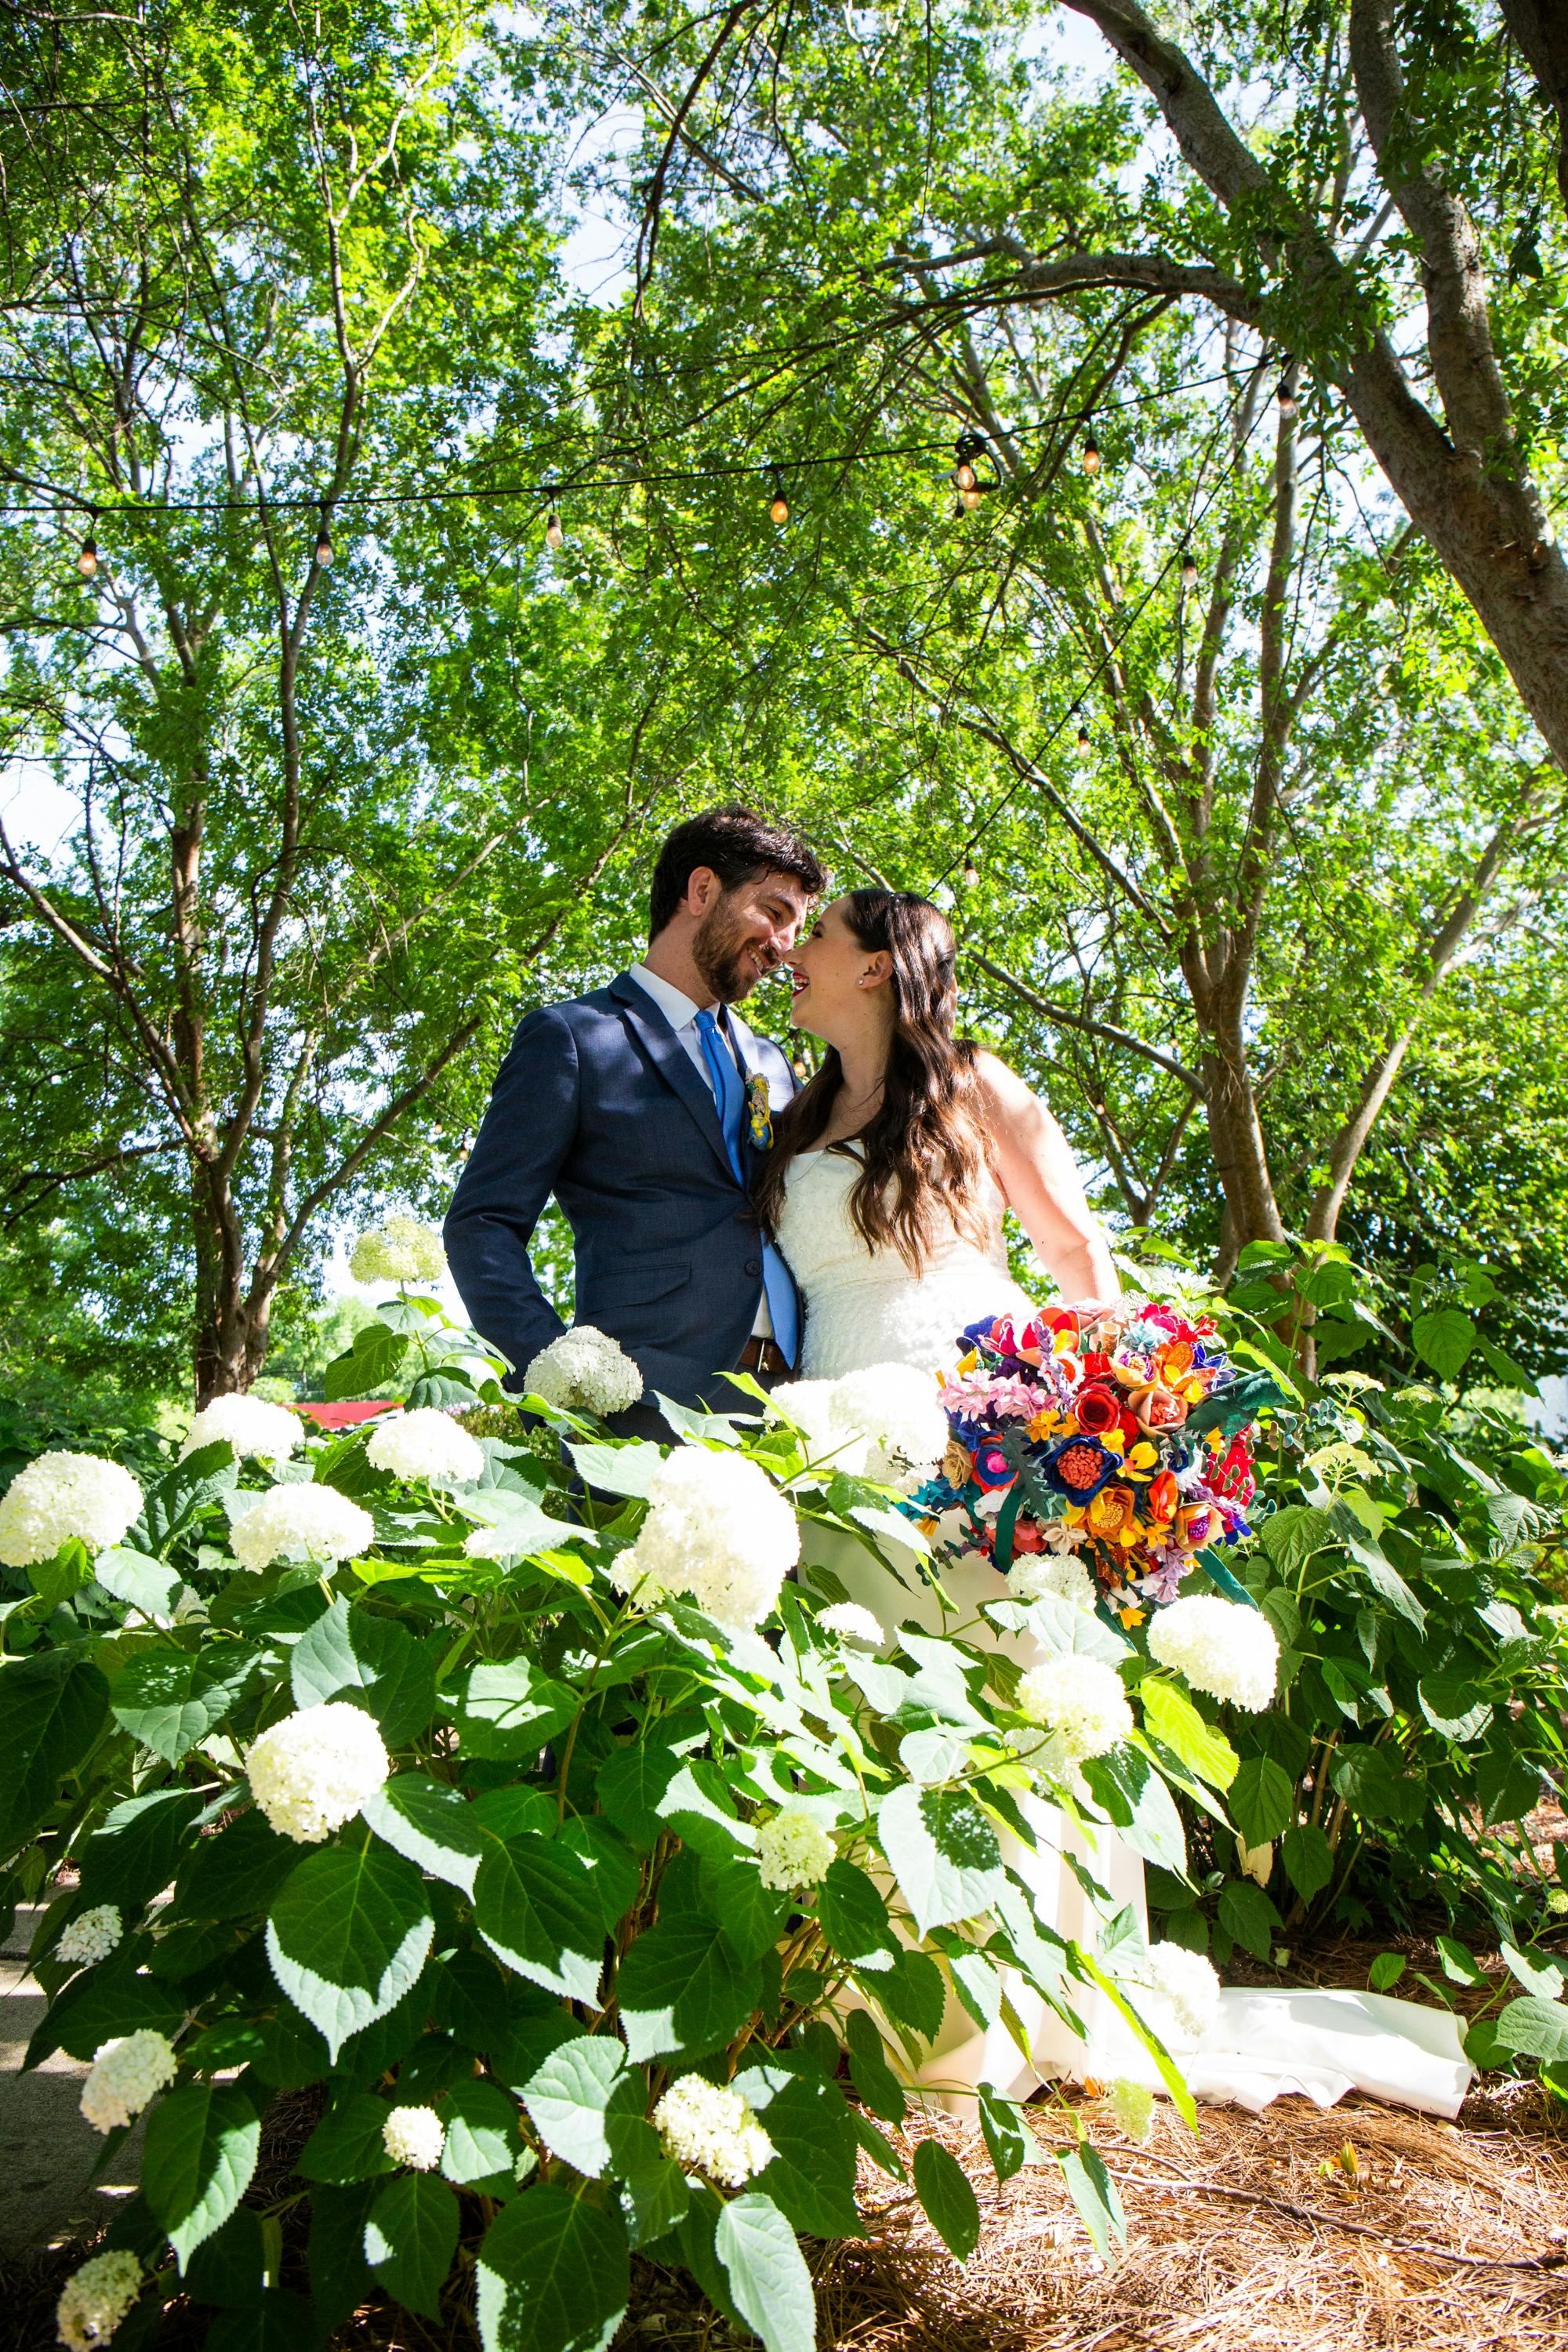 Lauren and Jake in the trees, holding the bouquet